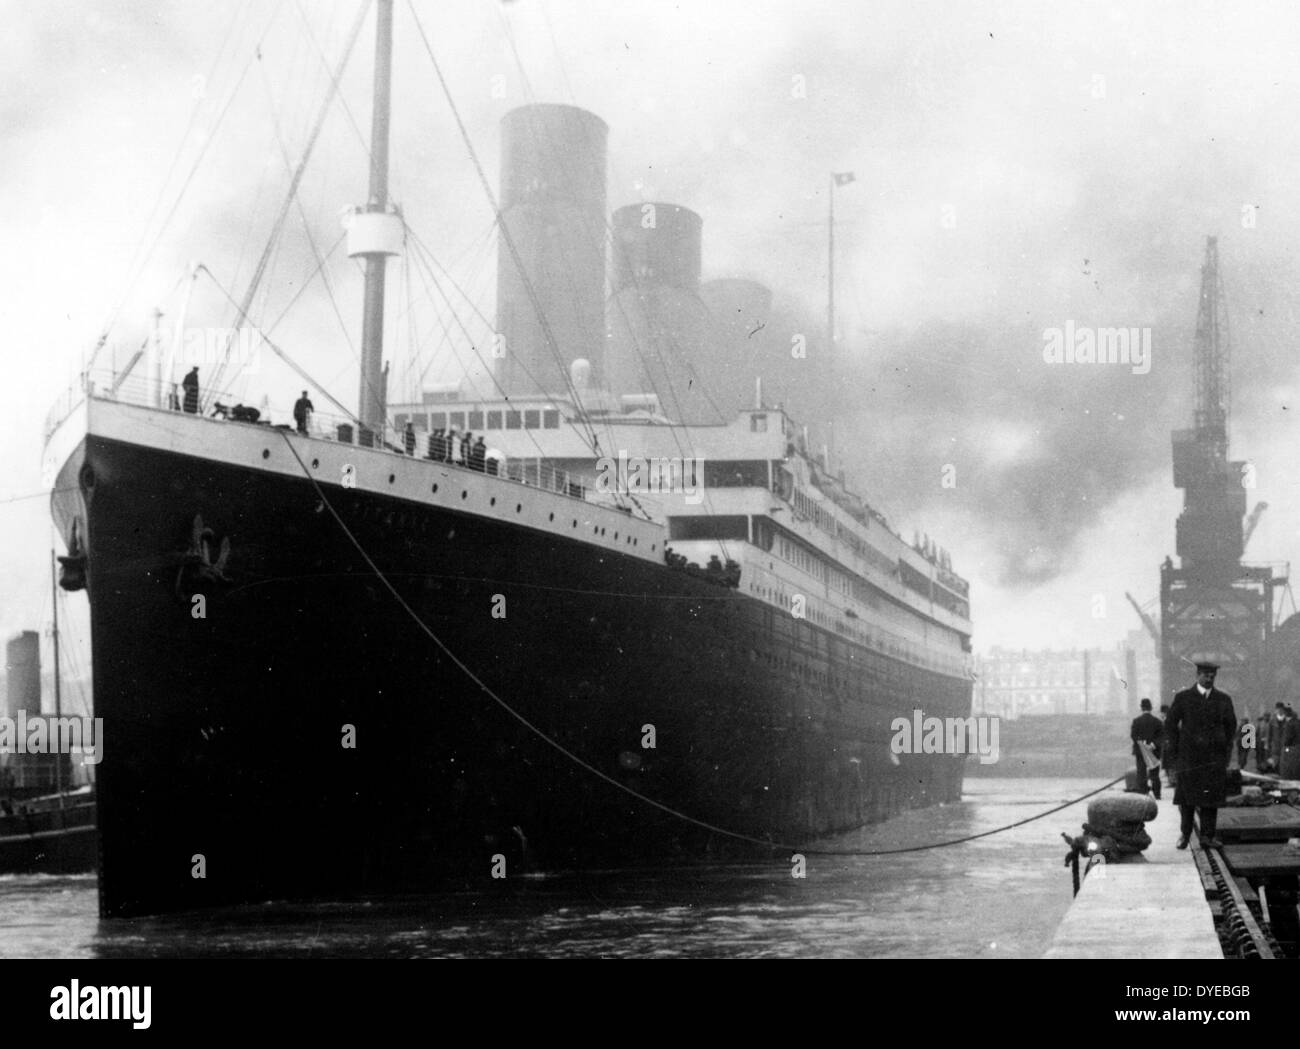 RMS Titanic was a British passenger liner that sank in the North Atlantic Ocean on 15 April 1912 after colliding with an iceberg during its maiden voyage from Southampton, UK to New York City, US. The sinking of Titanic caused the deaths of 1,502 people in one of the deadliest peacetime maritime disasters in modern history. Stock Photo